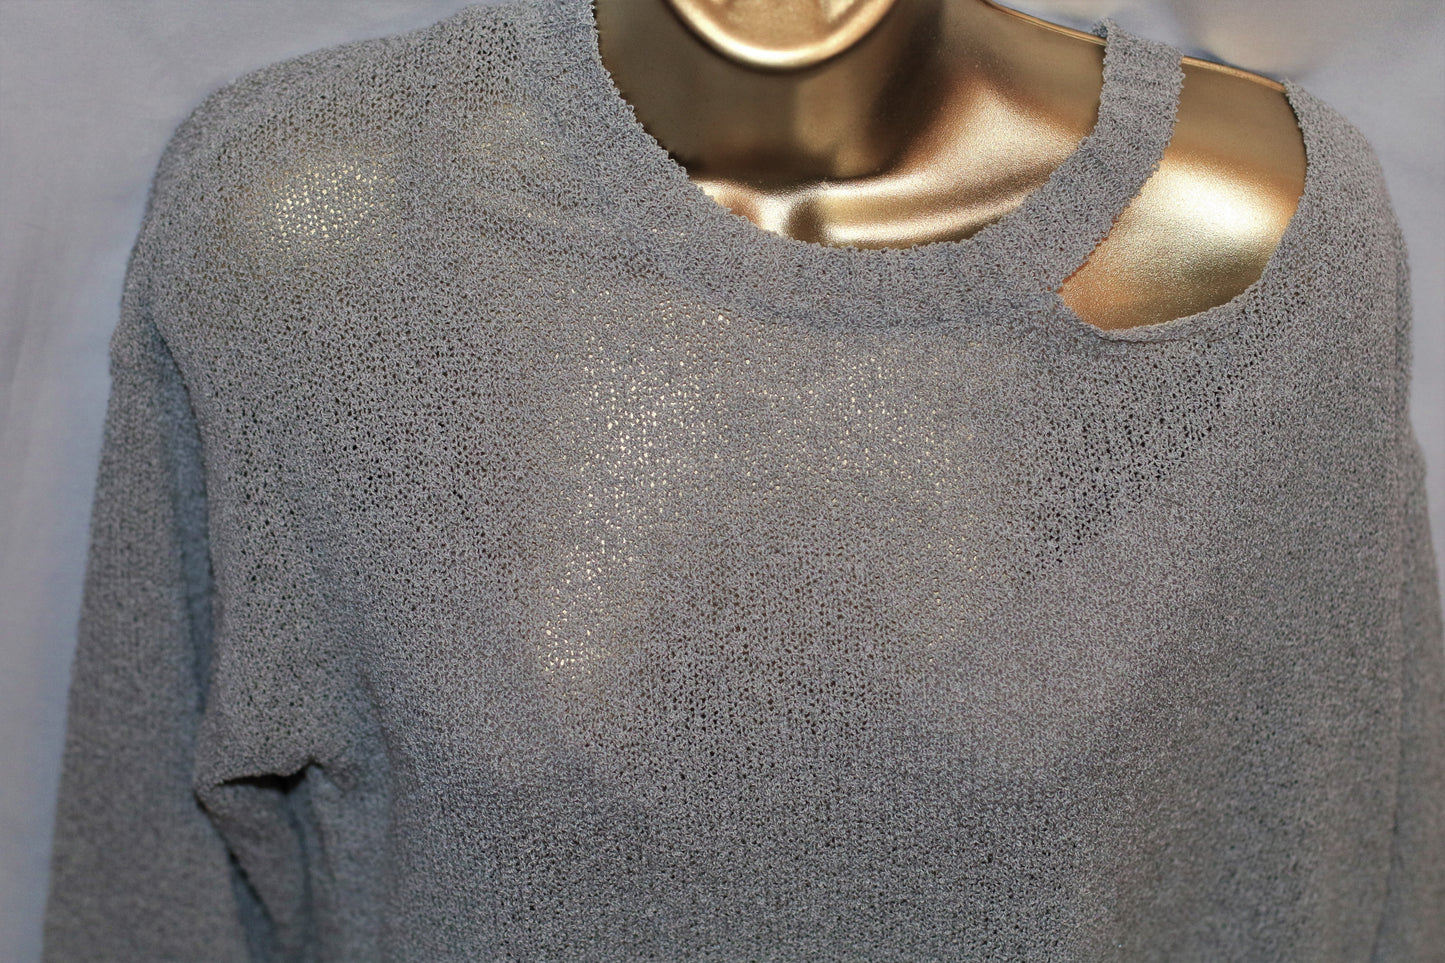 Women's Gray Cold Shoulder Sweater